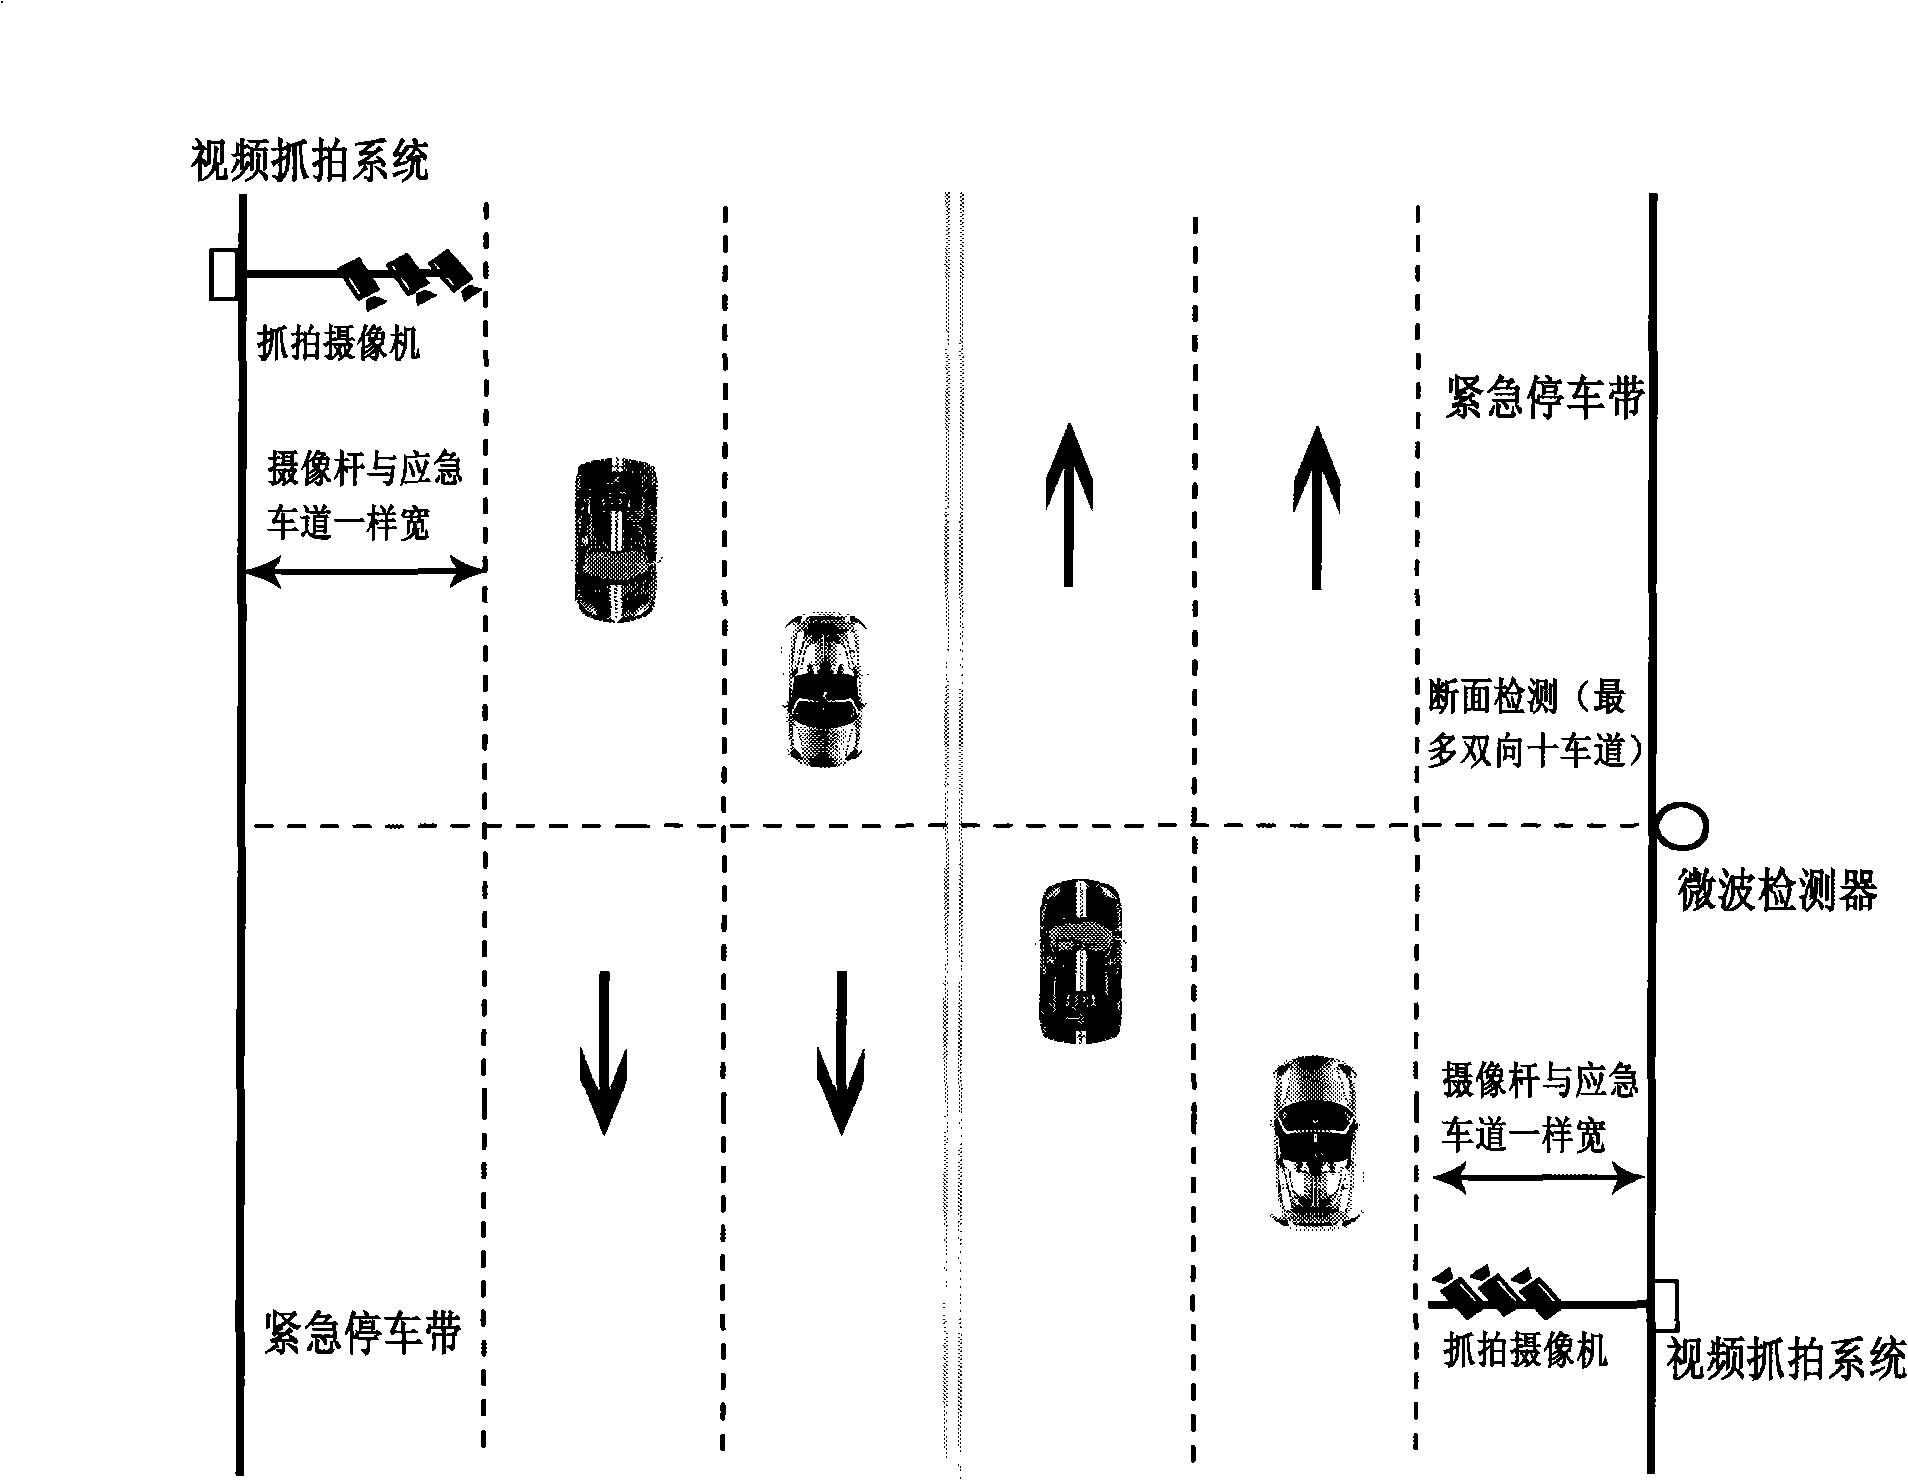 Automatic monitoring system for automobile overspeed